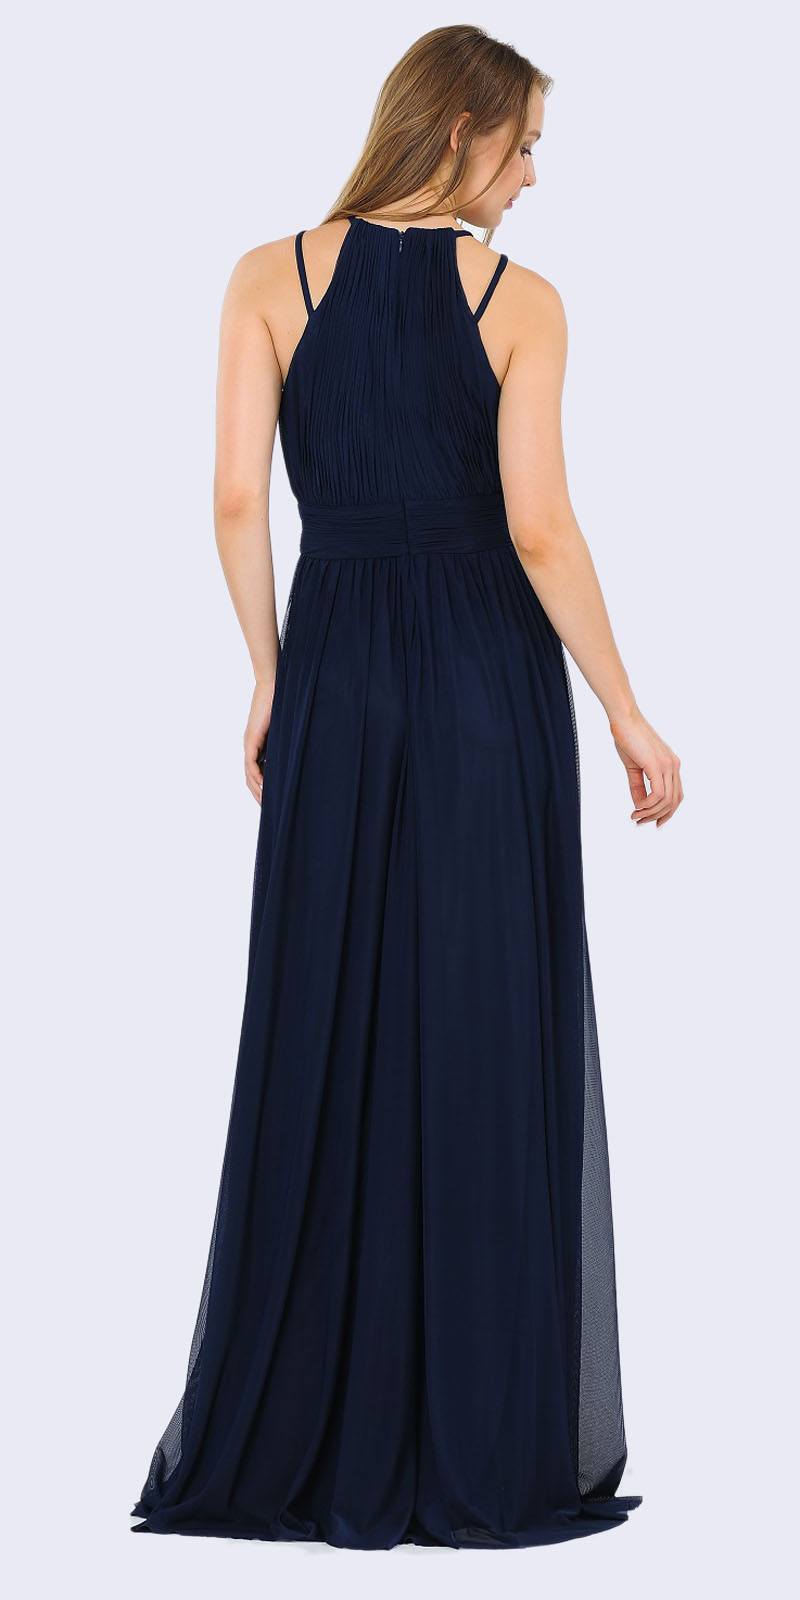 Poly USA 8396 Halter Ruched Bodice Long Formal Dress Navy Blue